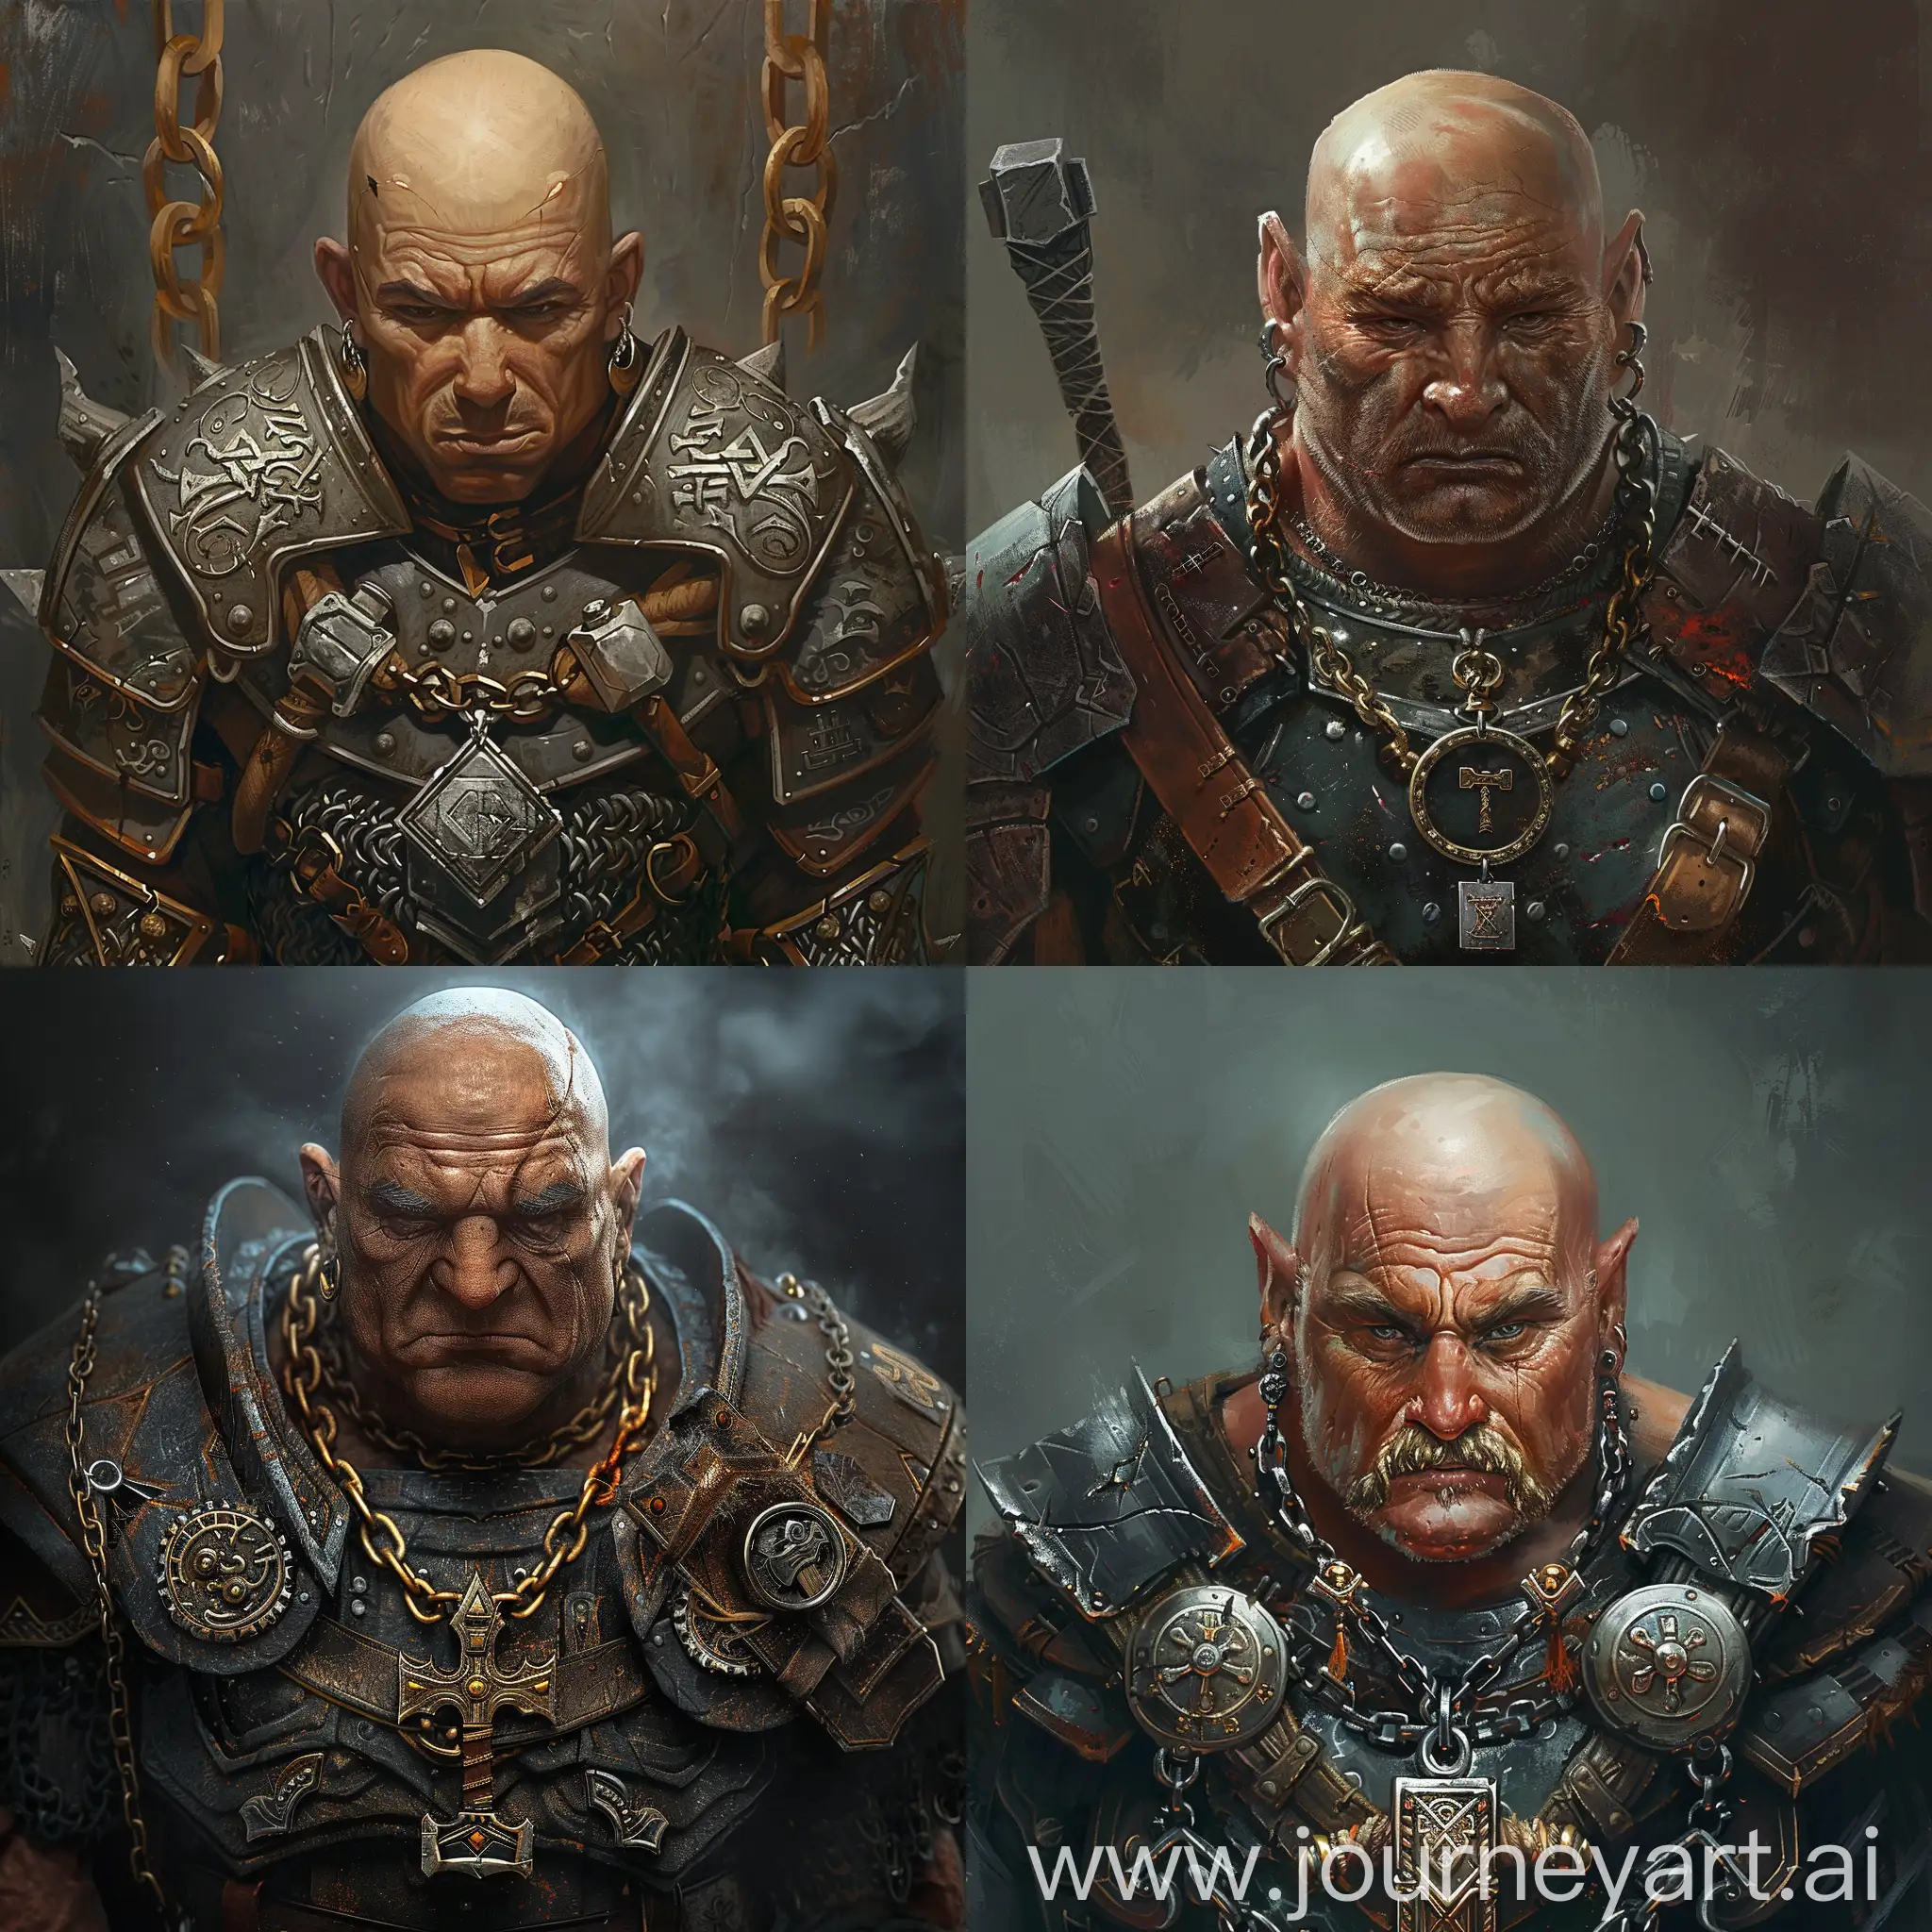 a fantasy bald dwarf wearing heavy armor and with a necklace representing a hammer